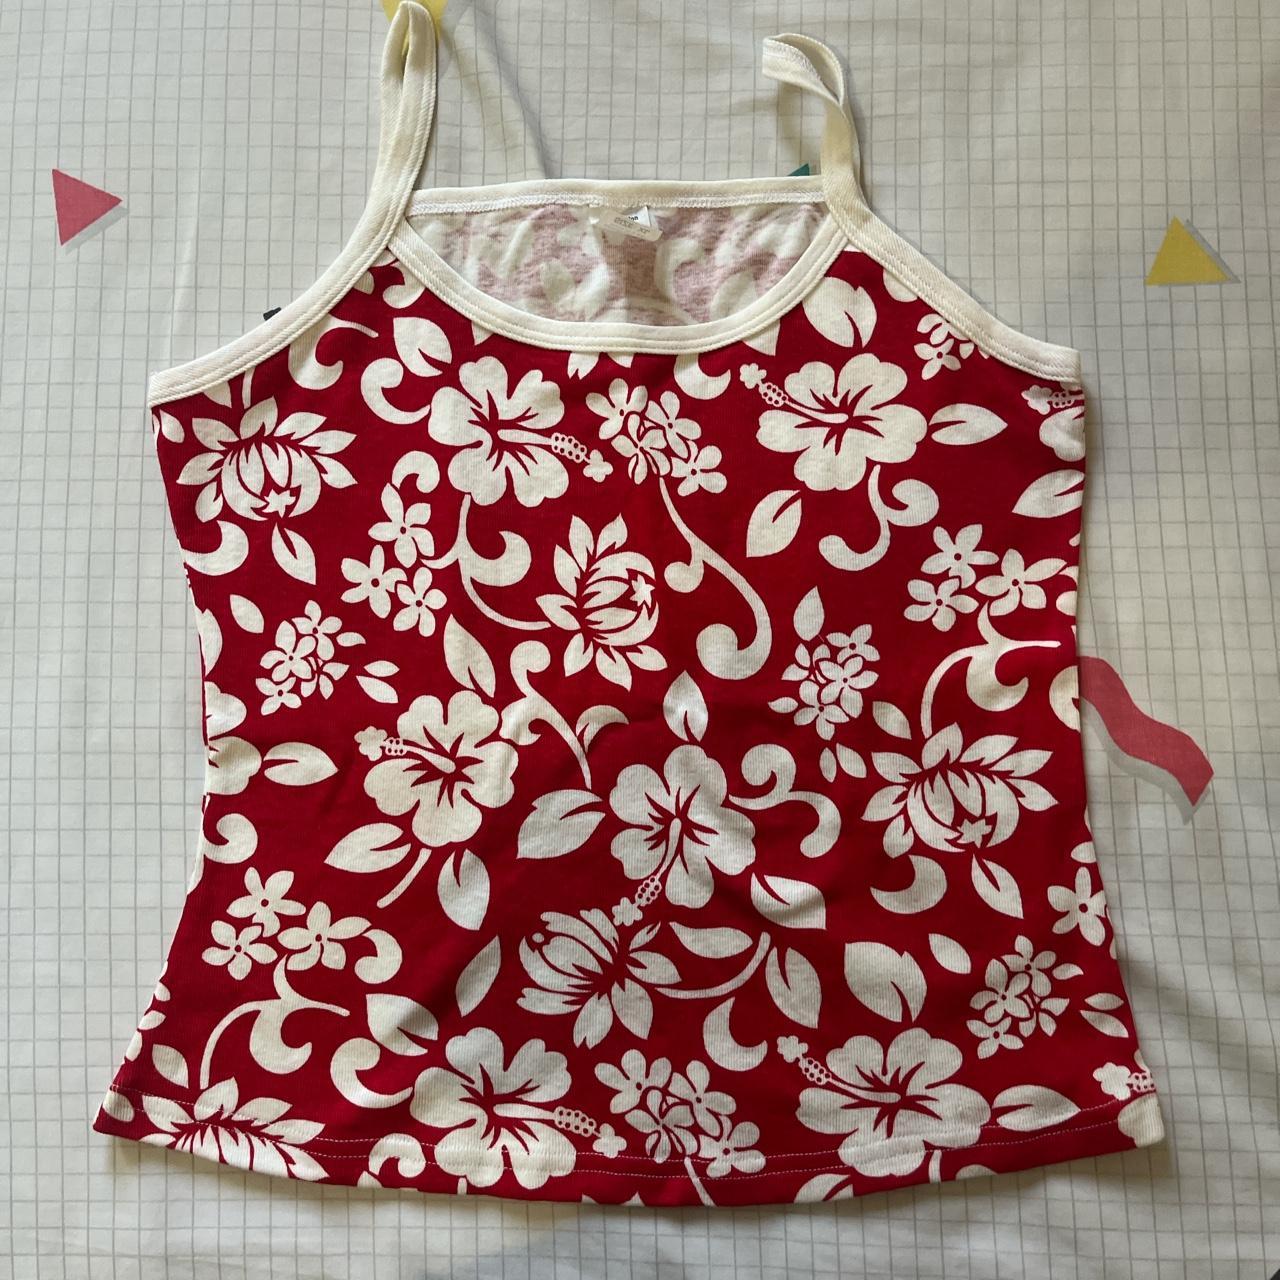 2000s Red Hibiscus Tank fits M/L length: 20x17in - Depop